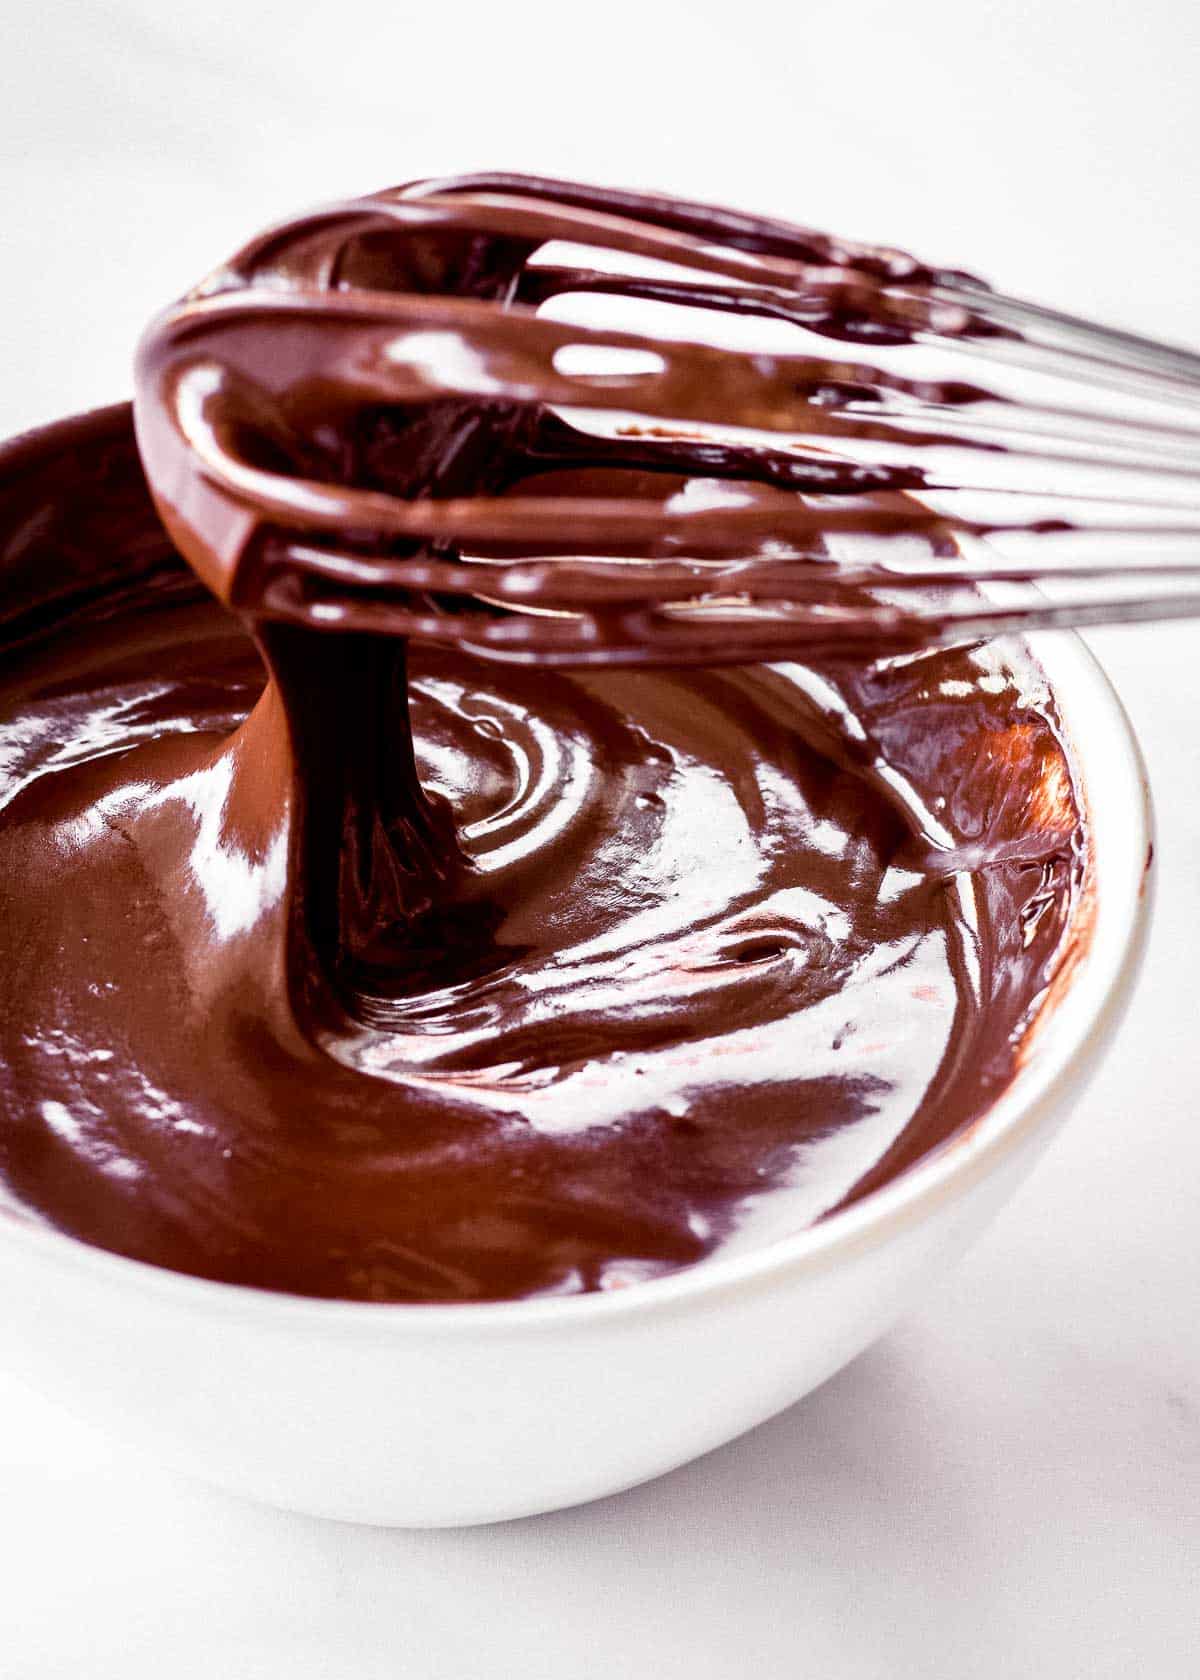 Vegan chocolate ganache drips off a whisk and into a white bowl.